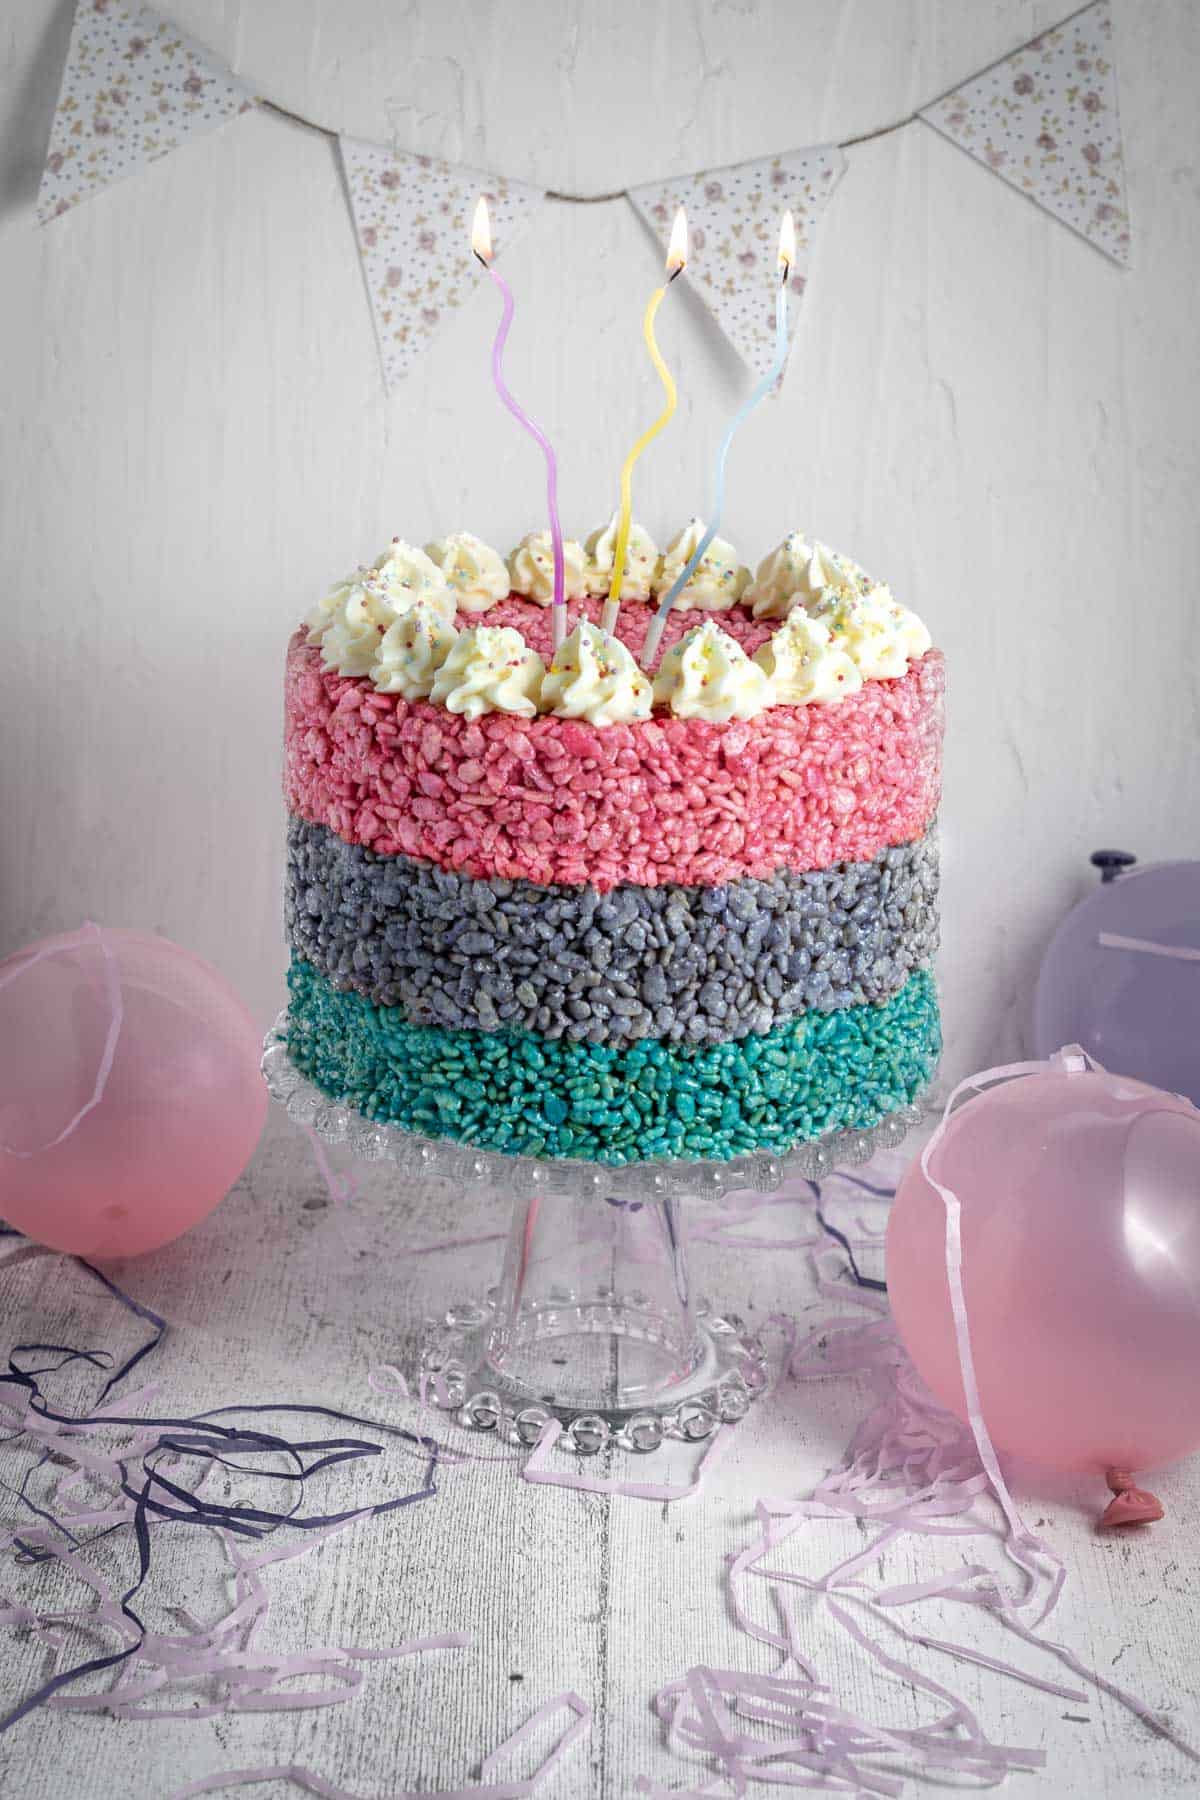 A three layered Rice Krispie cake on a cake stand, surrounded by balloons.